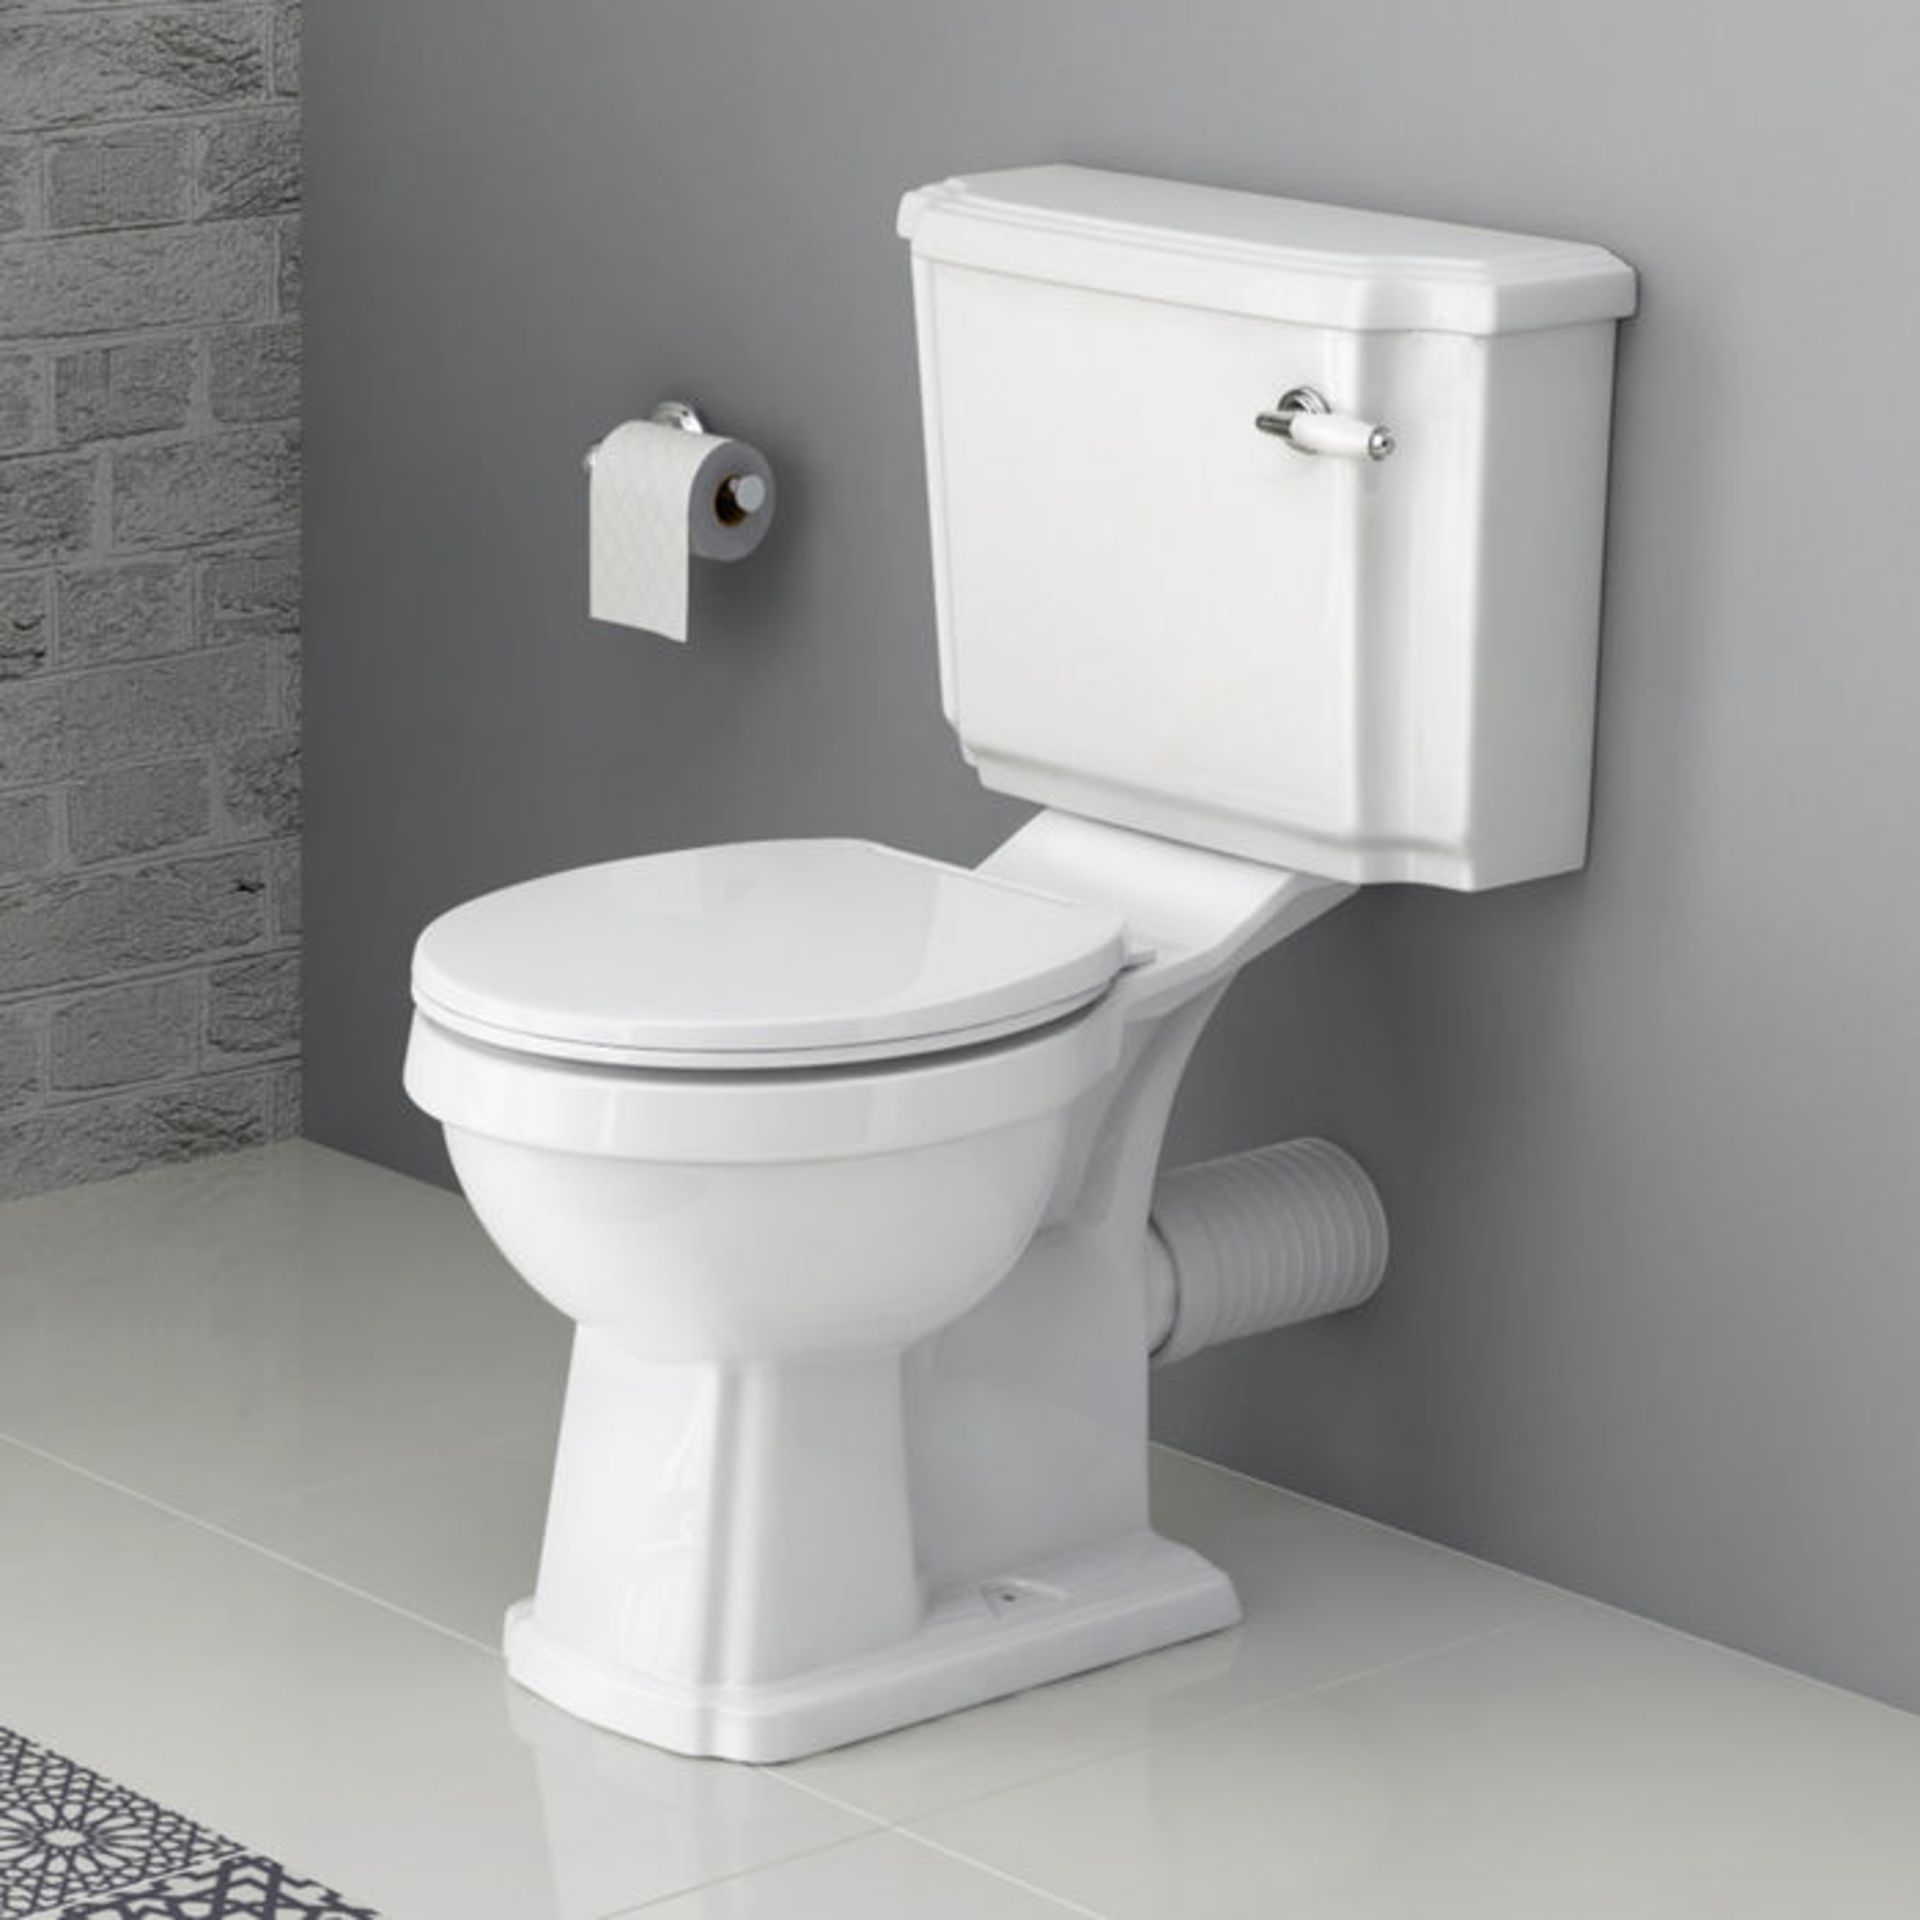 New & Boxed Cambridge Traditional Close Coupled Toilet & Cistern - White Seat. Traditional Fea... - Image 2 of 2